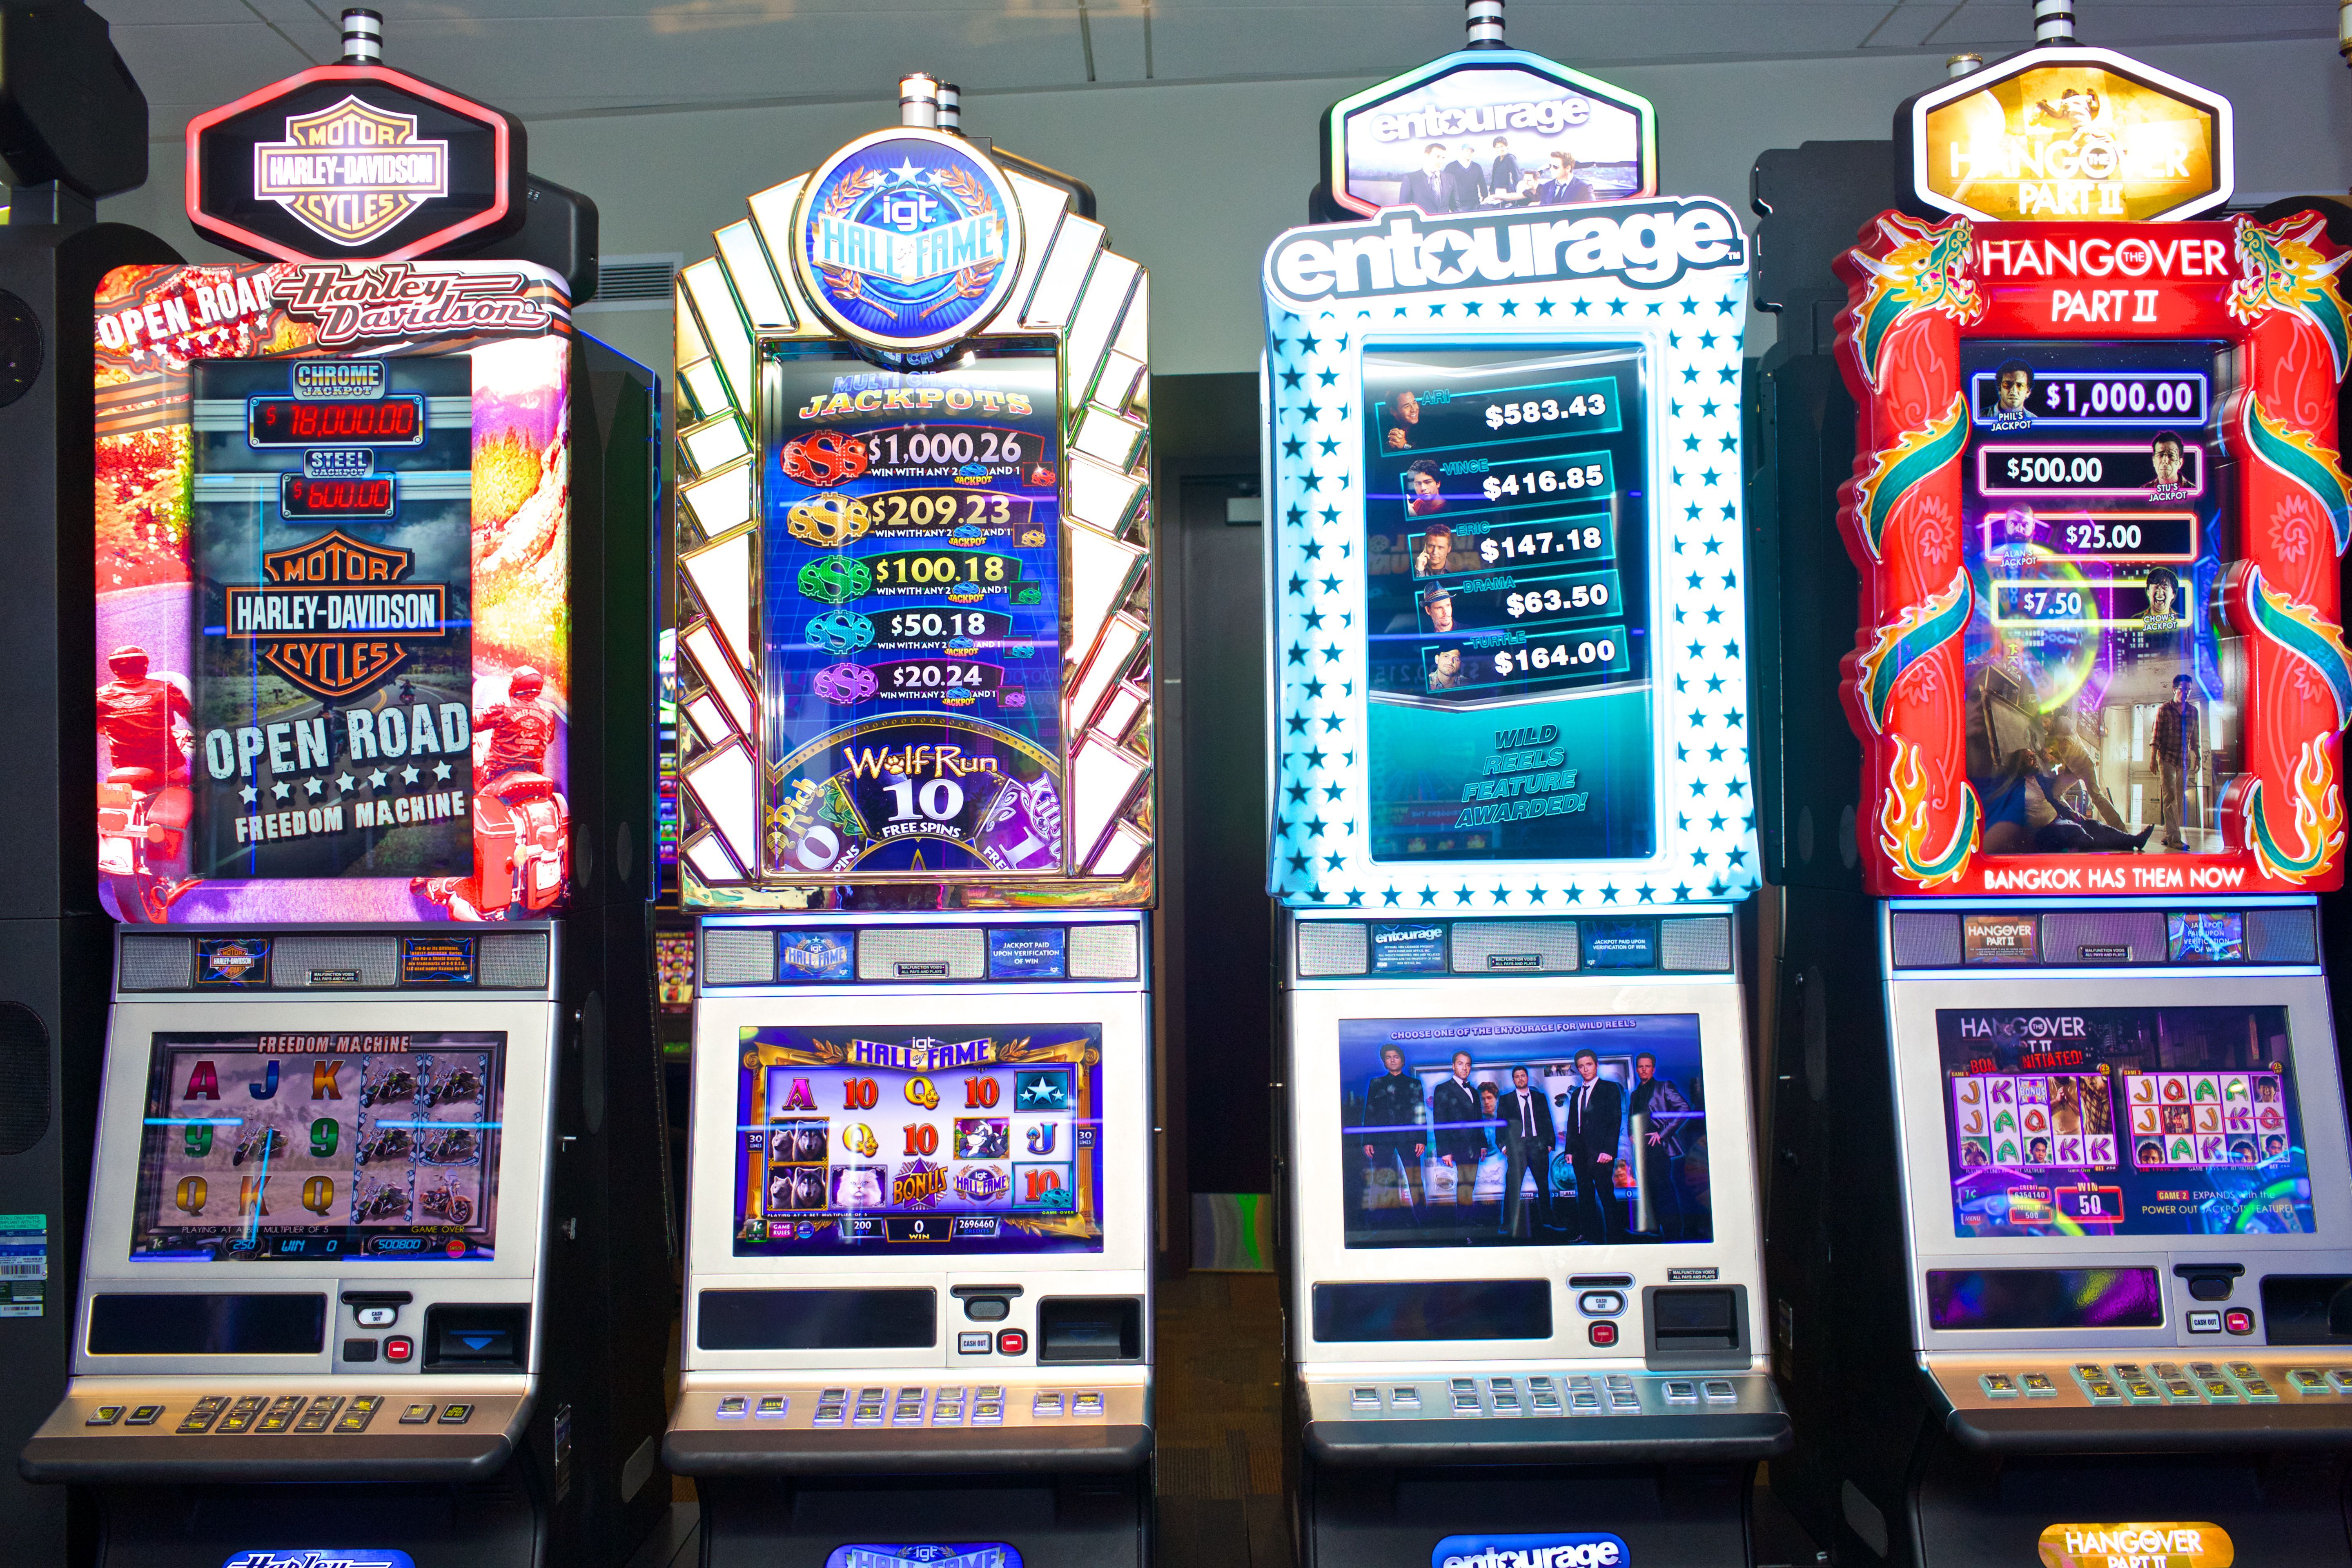 Popular five-reel games are Mega Moolah, which has 30 betting lines, Spin or Reels with 20 paylines, and the legendary Eye of Horus or Cleopatra slot with 5-reels and 20 paylines, devoted to the Egypt theme.Other favorite free slots games are Wheel of Fortune and Texas Tea slots created by IGT/5.